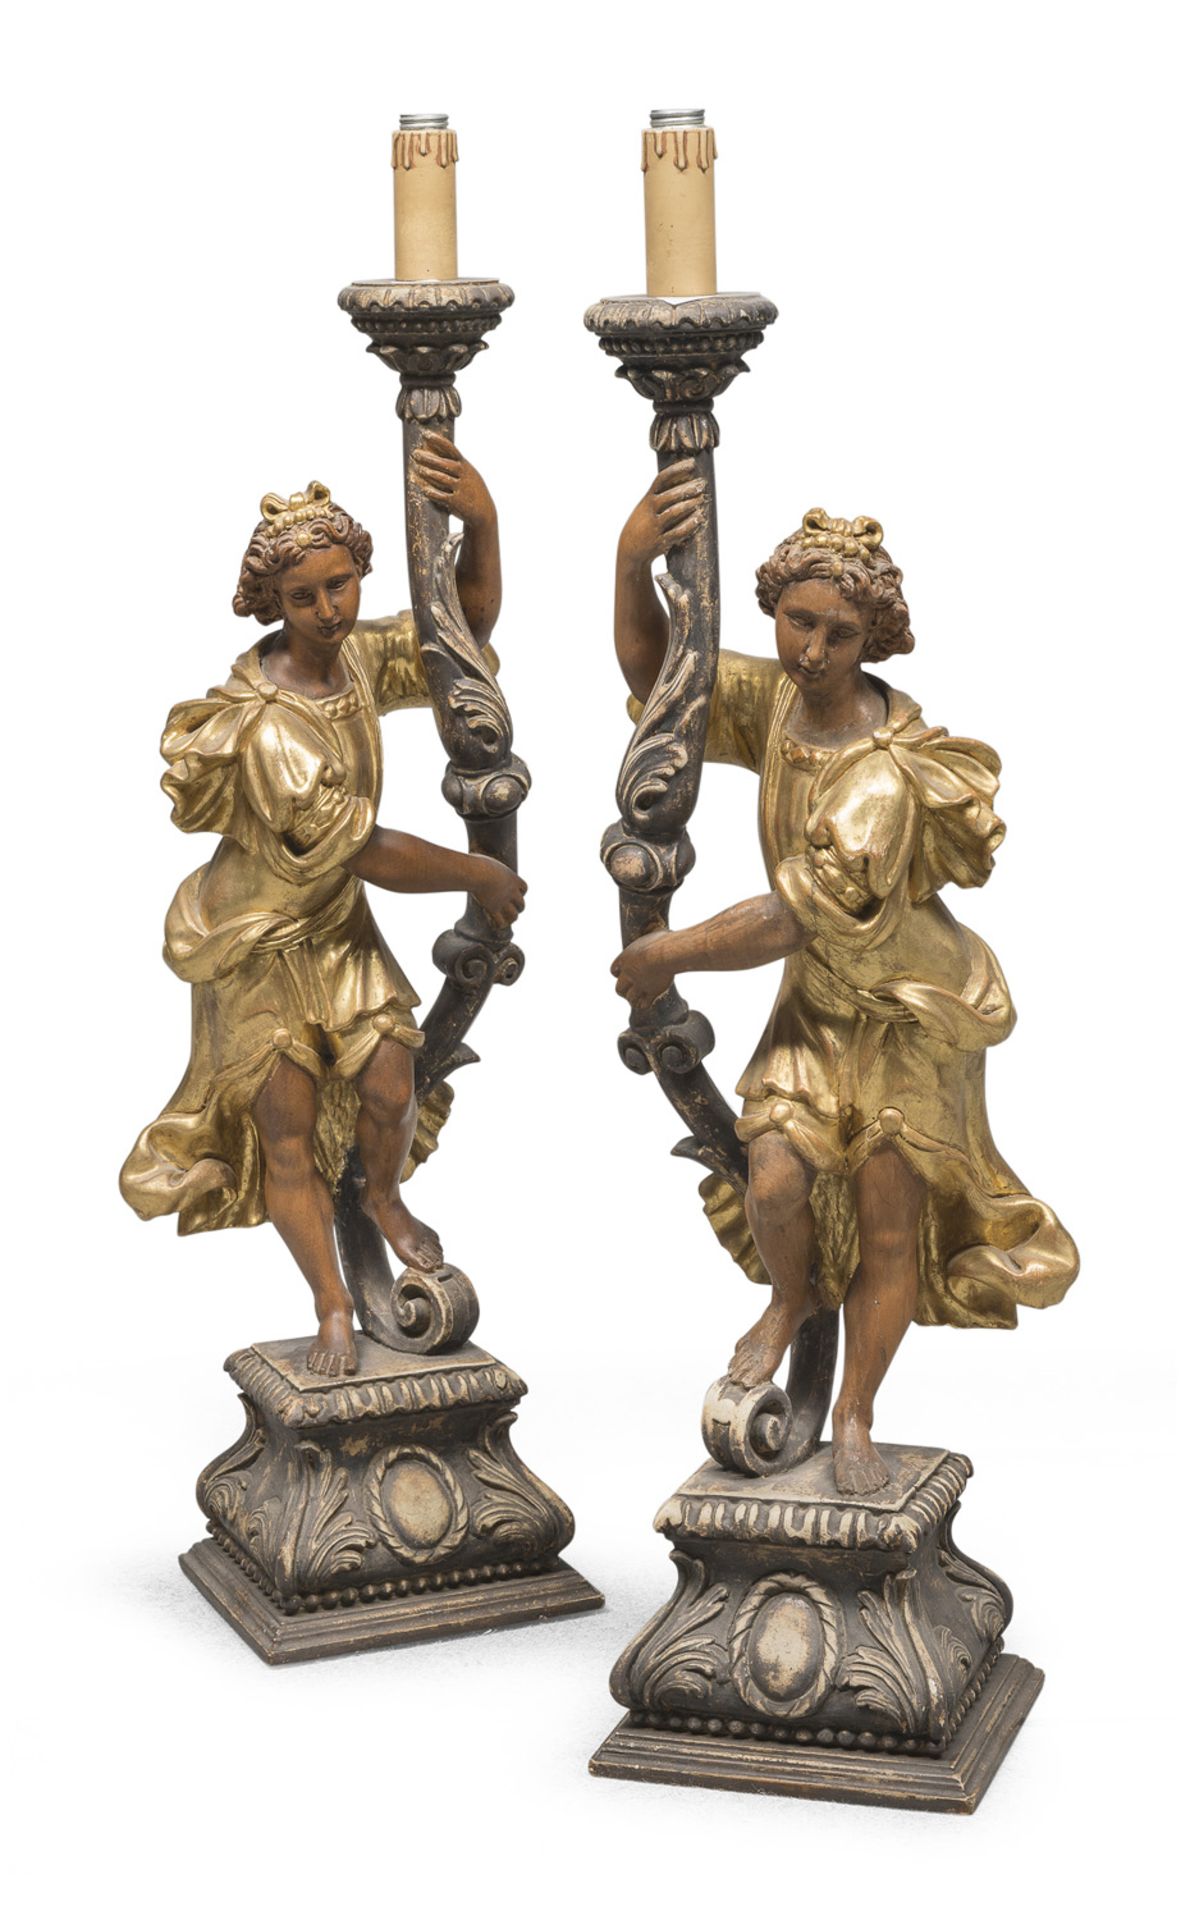 BEAUTIFUL PAIR OF CANDLESTICKS IN GILDED AND LACQUERED WOOD LATE 18th CENTURY